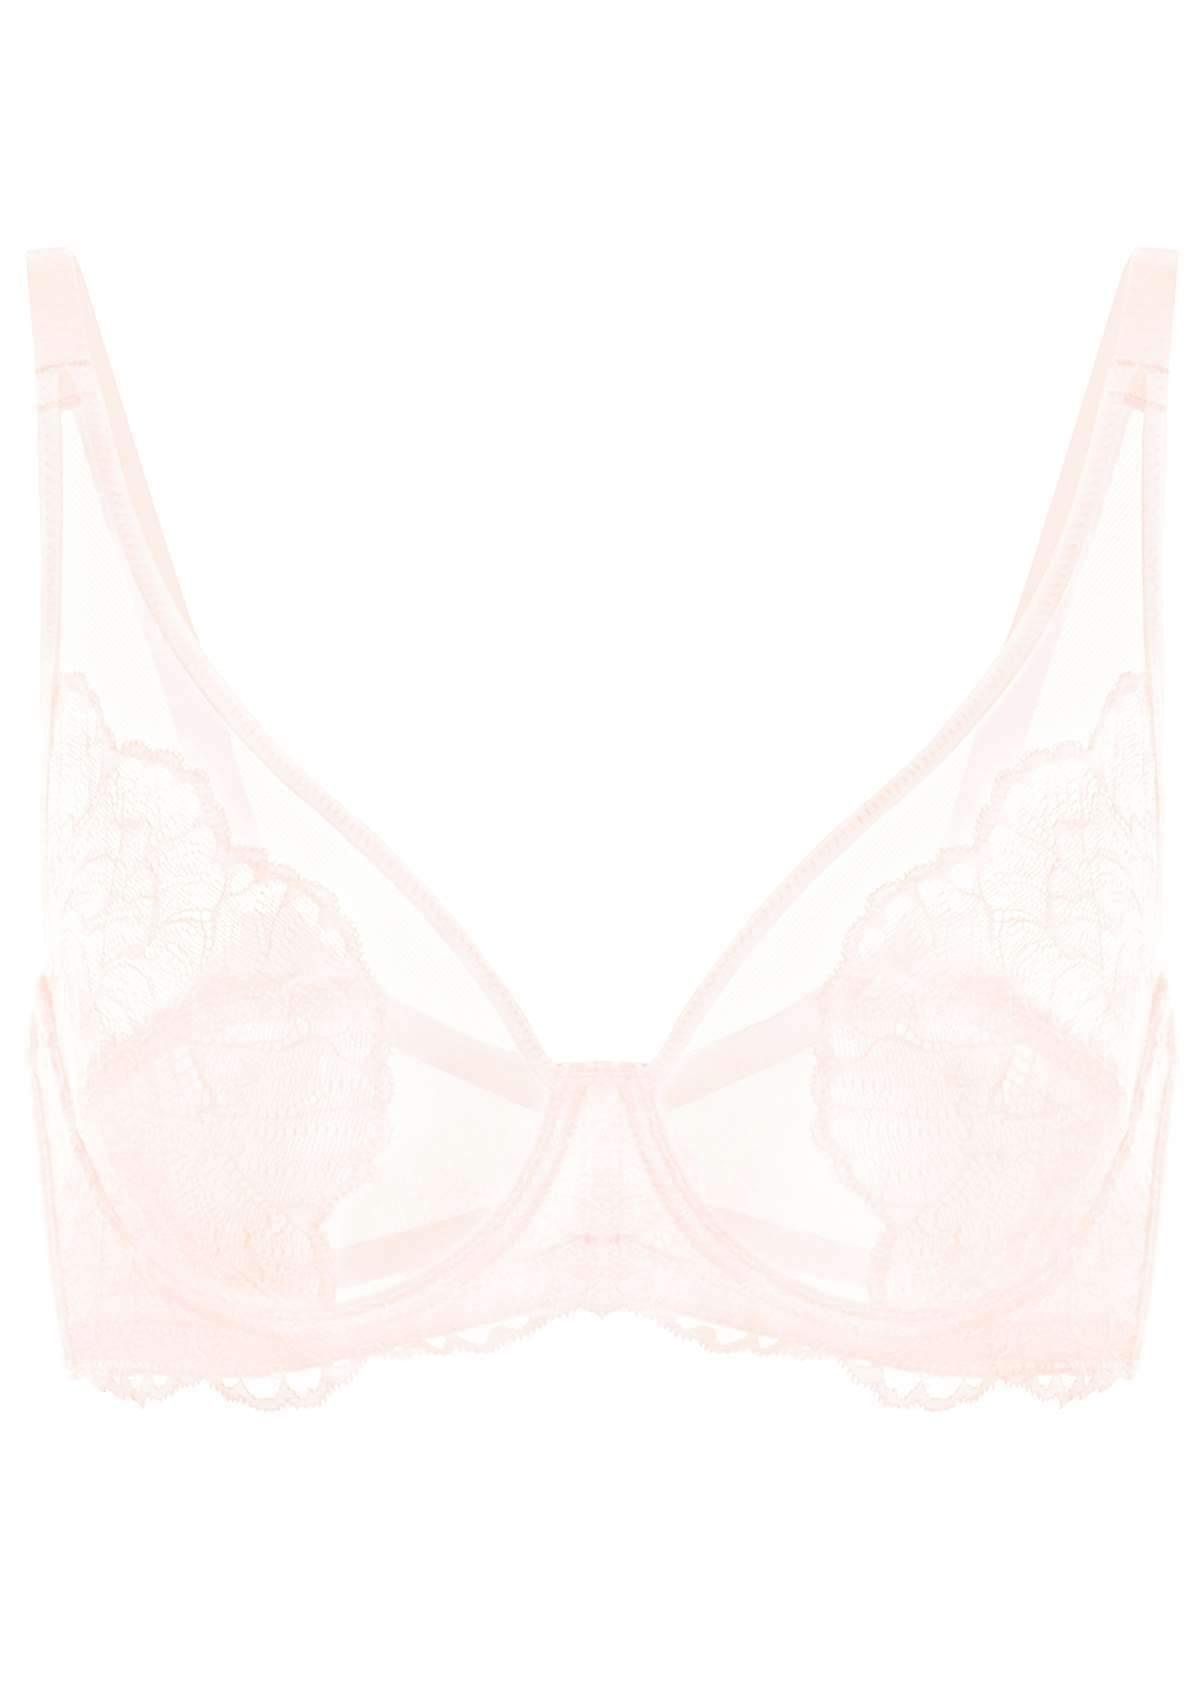 HSIA Blossom Sheer Lace Bra: Comfortable Underwire Bra For Big Busts - Dusty Peach / 44 / G